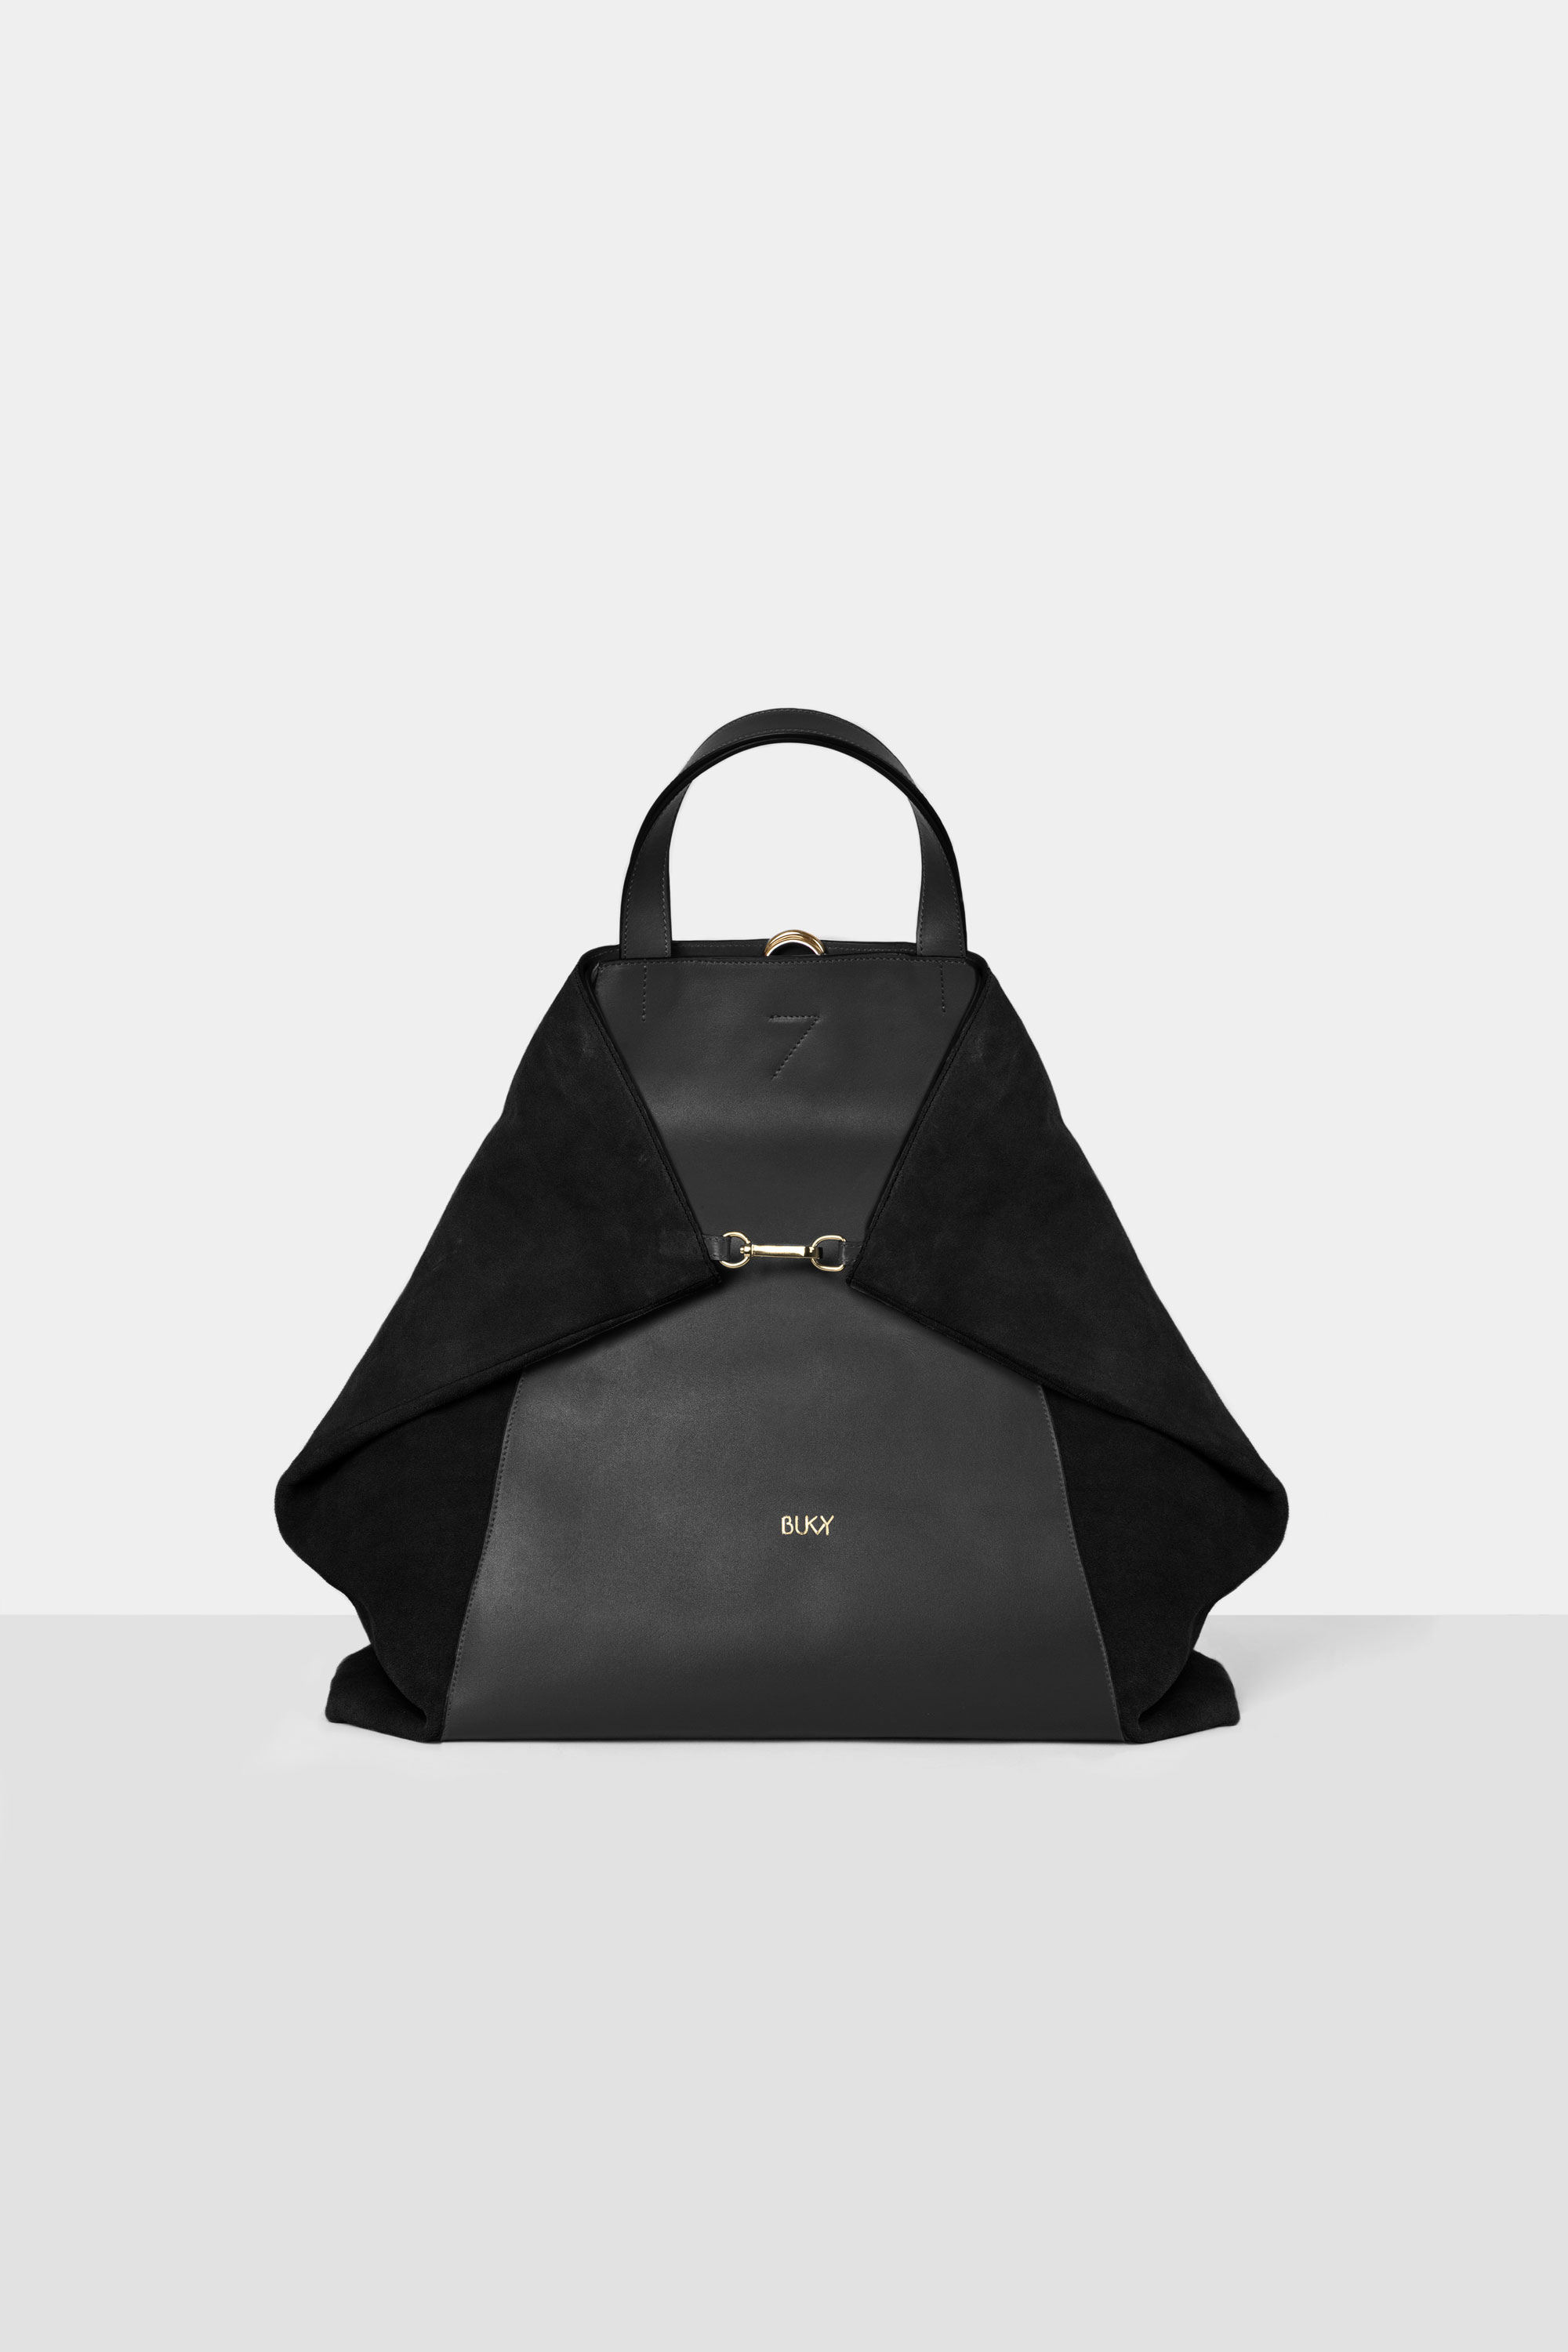 Bukvy Curie 3in1 Bag - Black with Gold Fittings